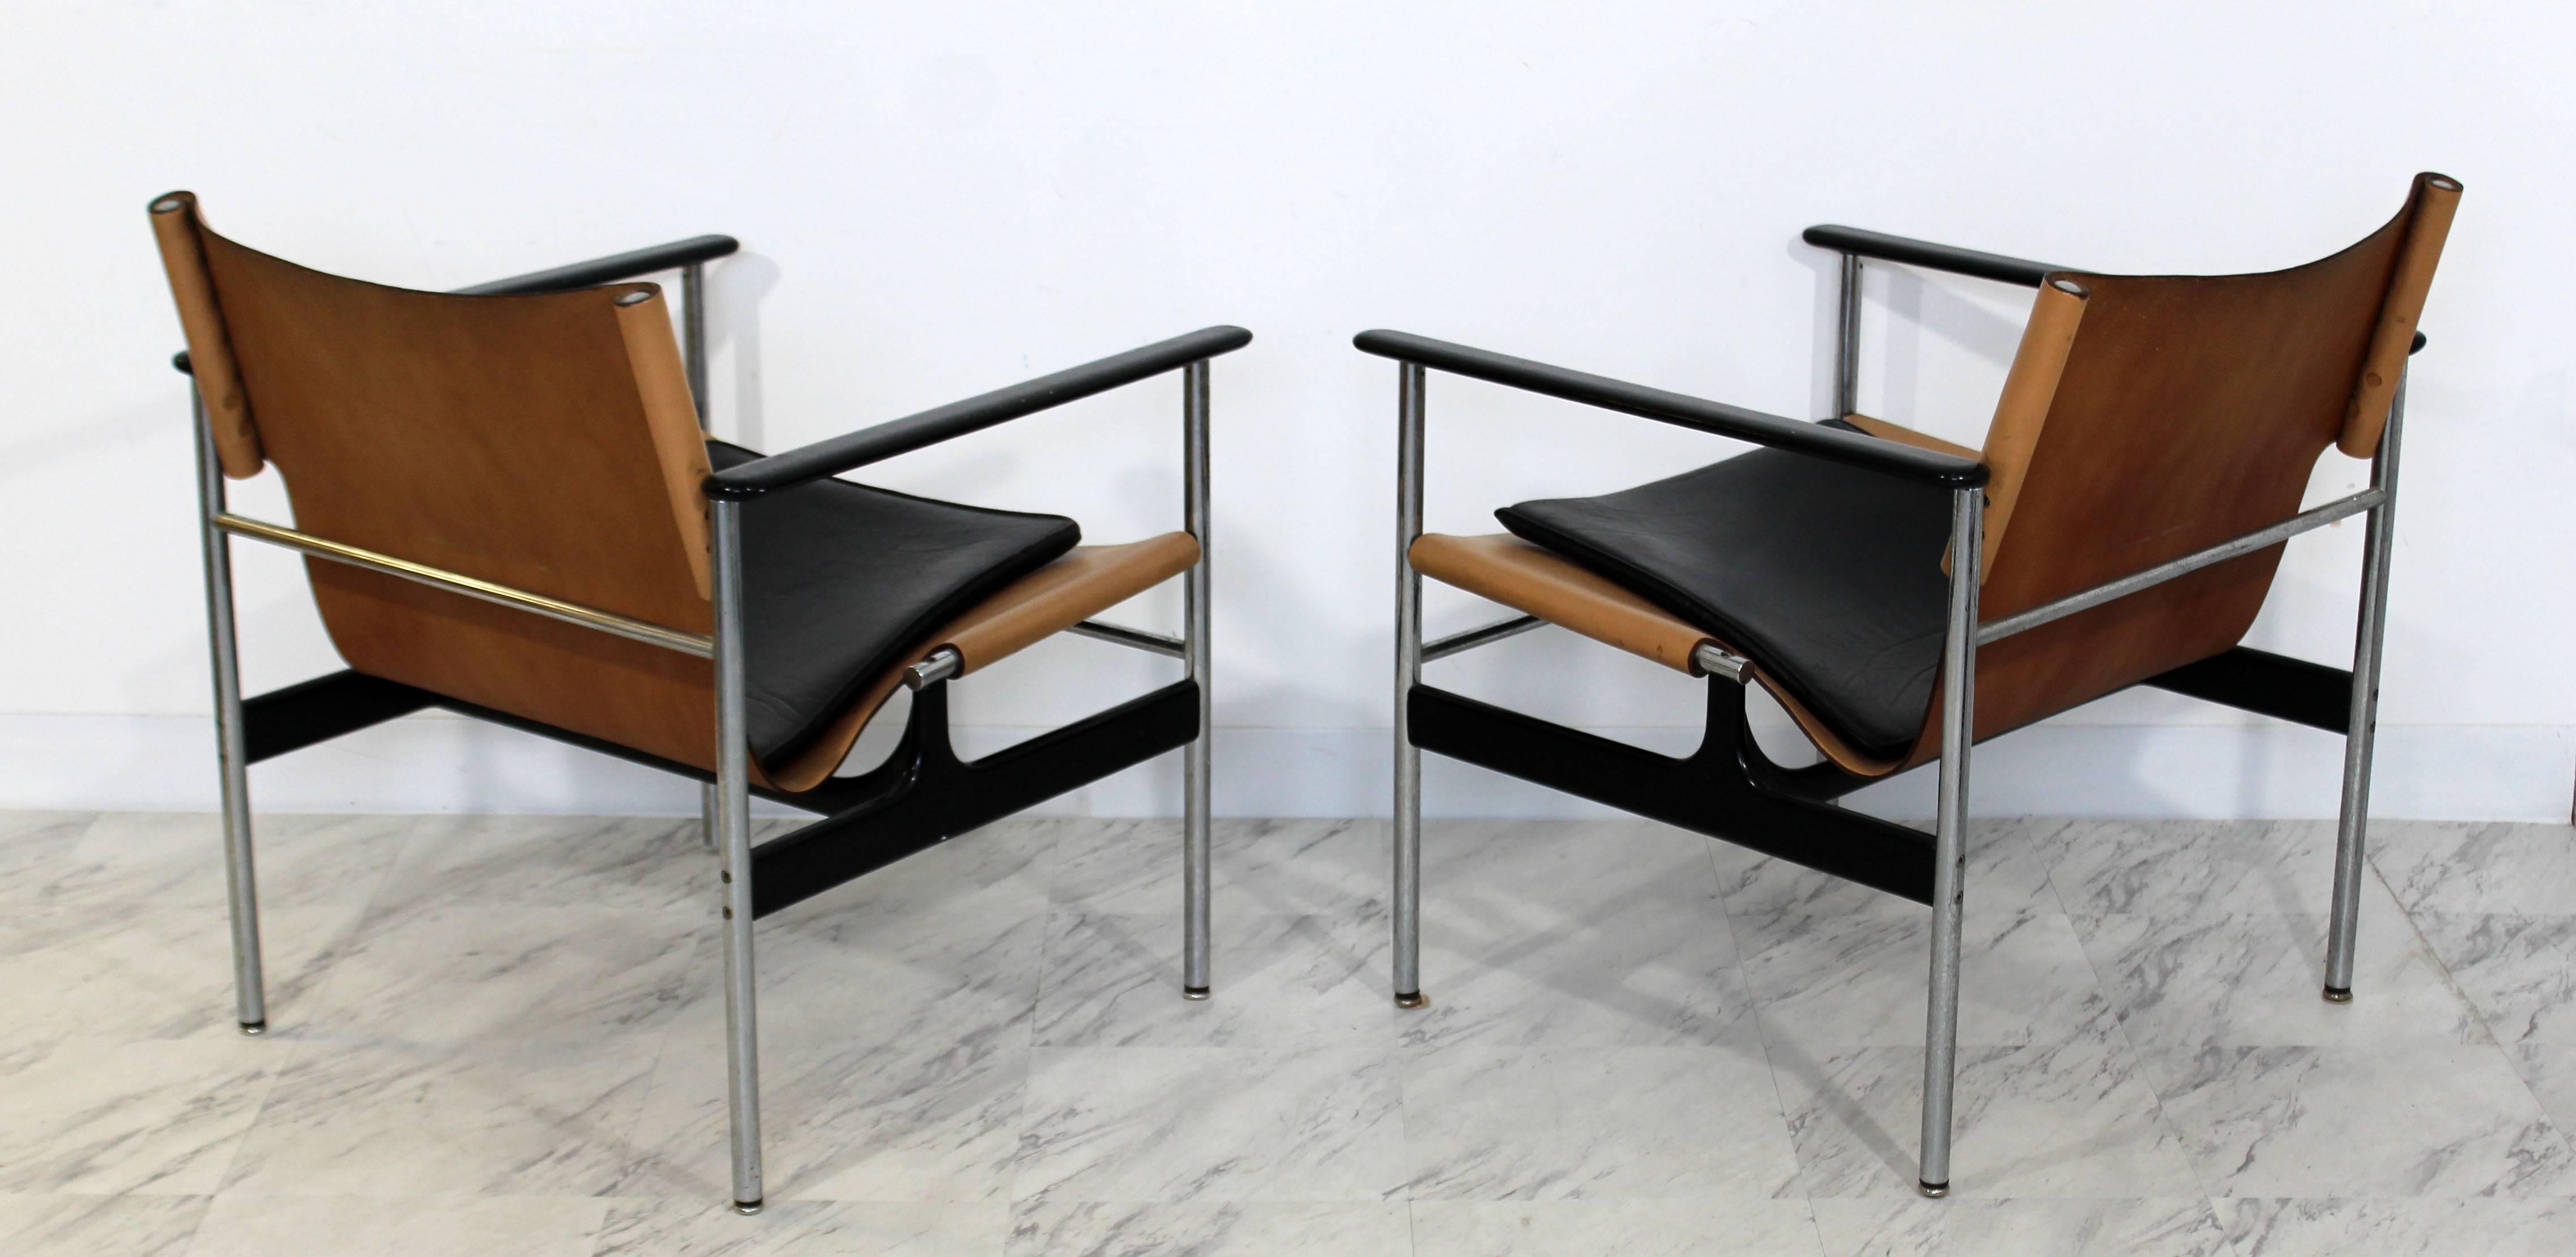 Leather Mid-Century Modern Pair of Charles Pollock for Knoll #657 Chrome Armchairs